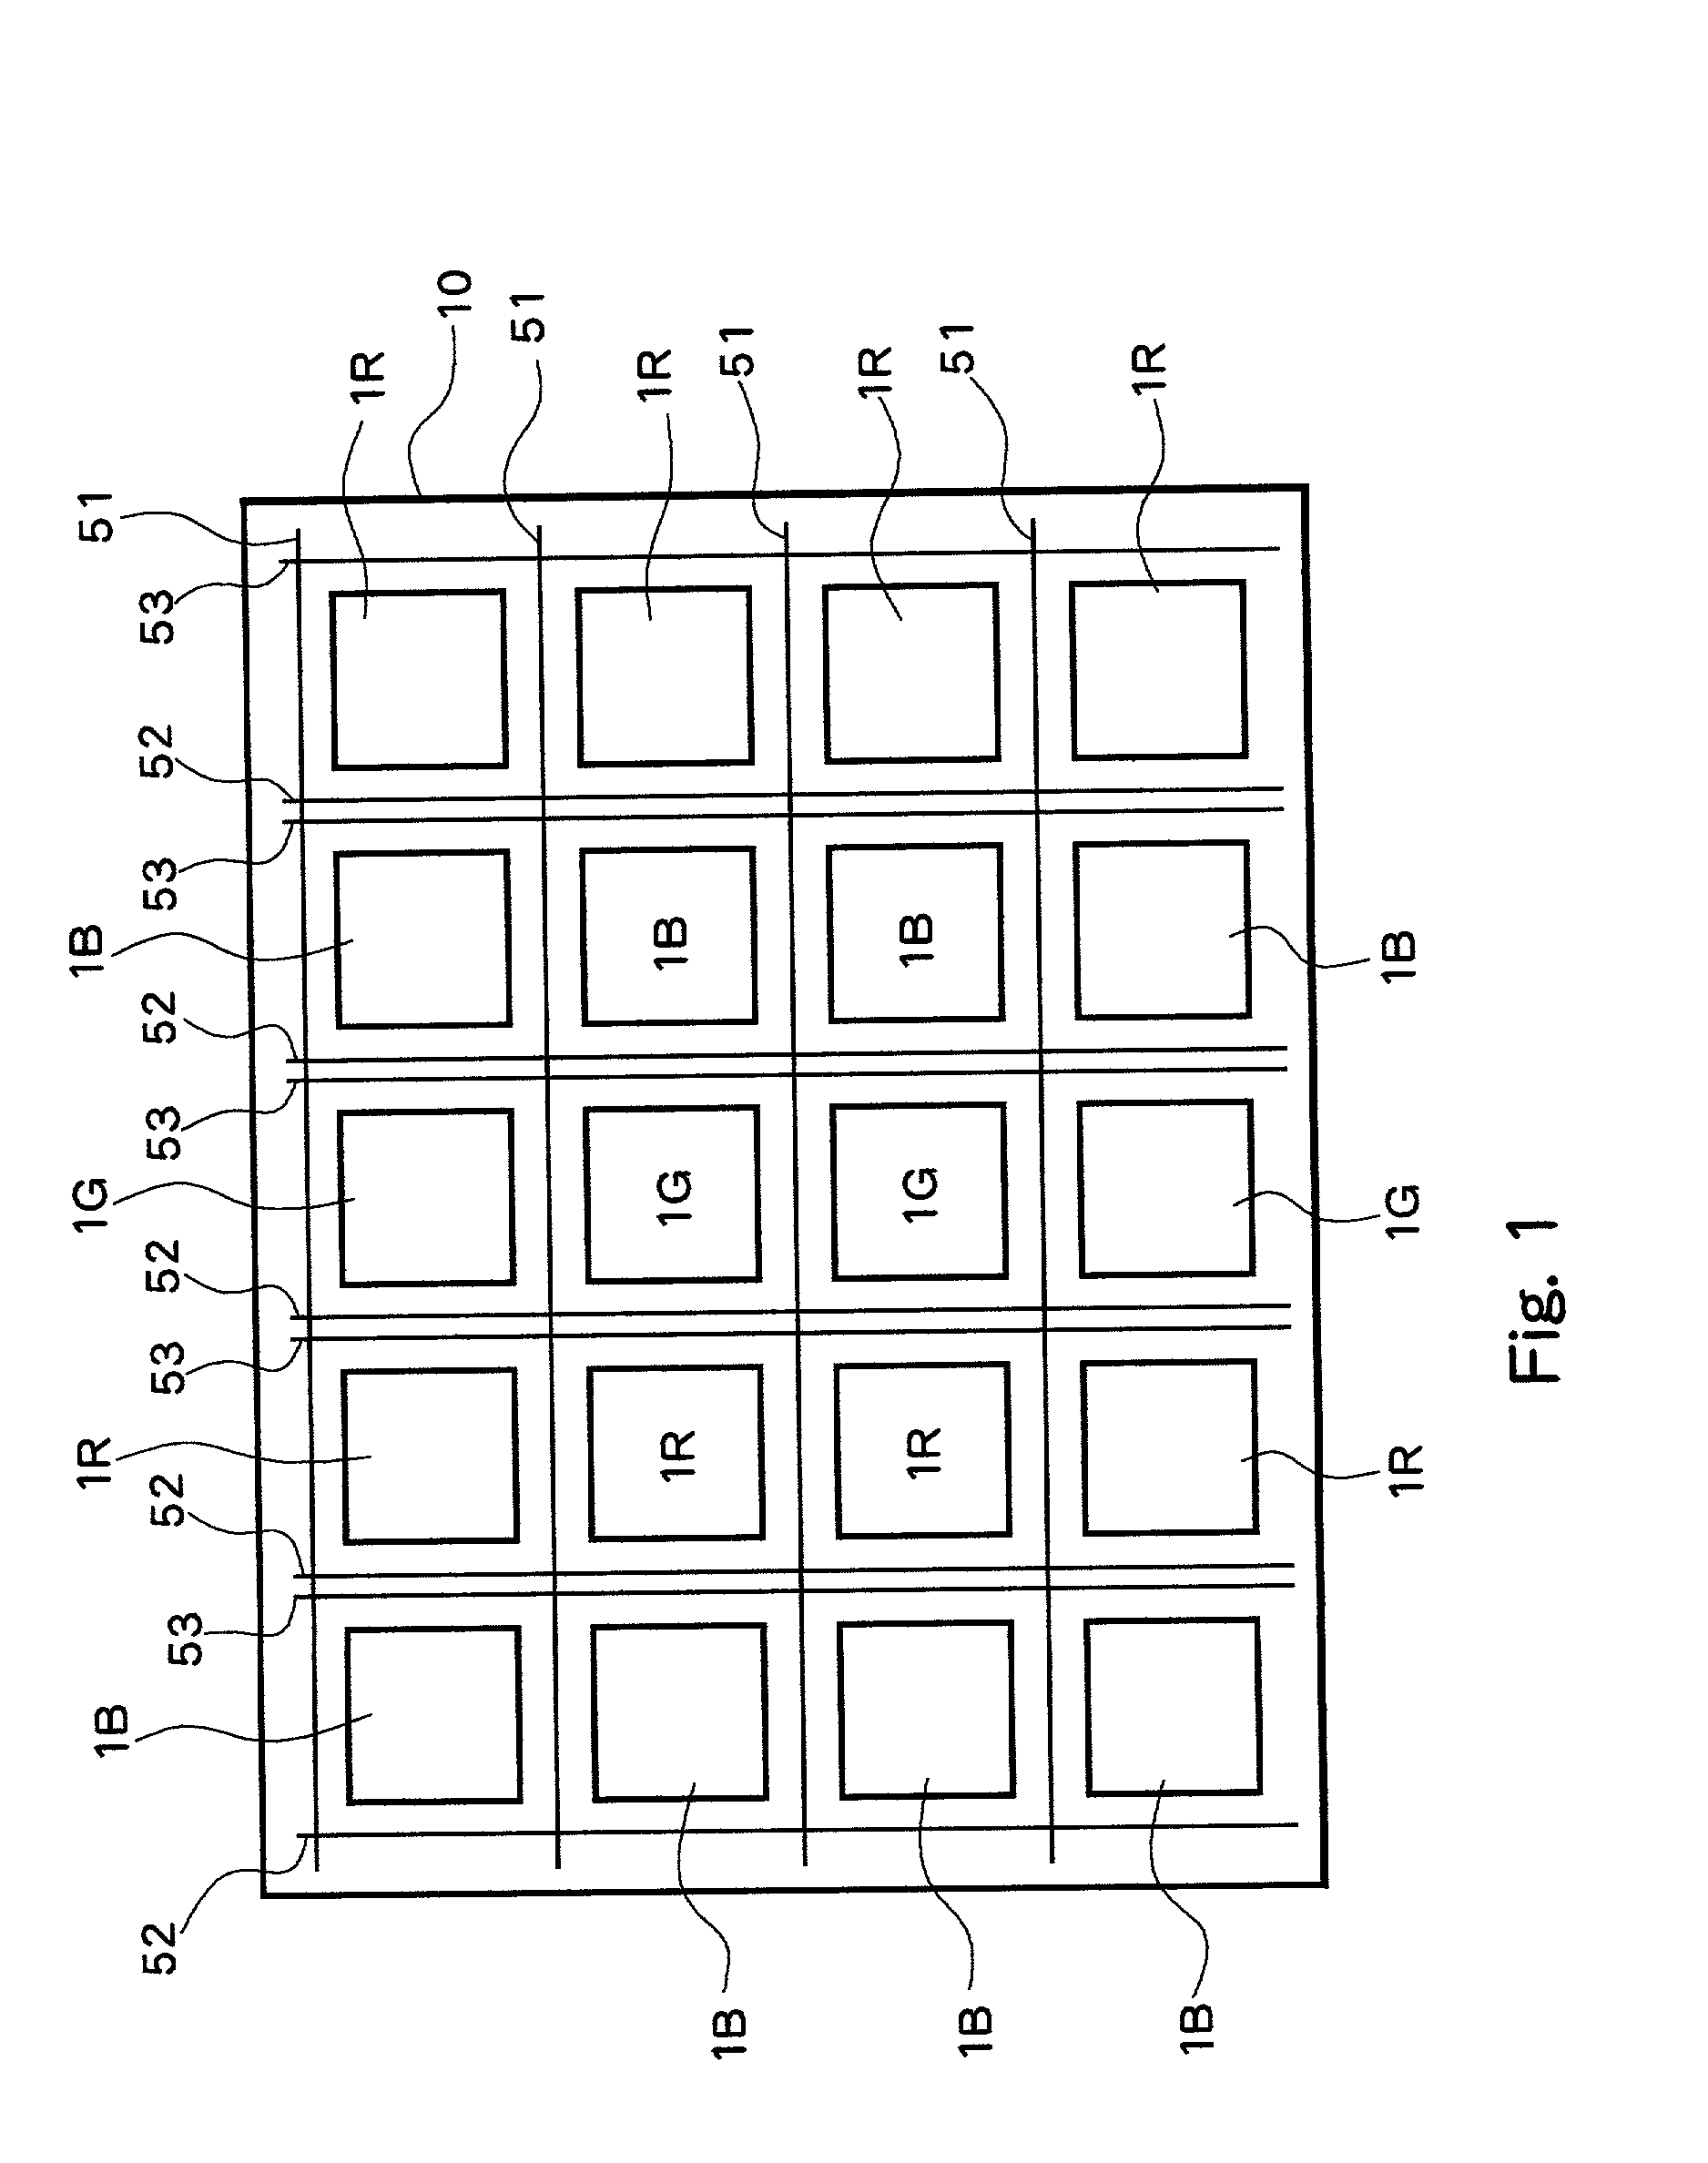 Method of attaching layer material and forming layer in predetermined pattern on substrate using mask